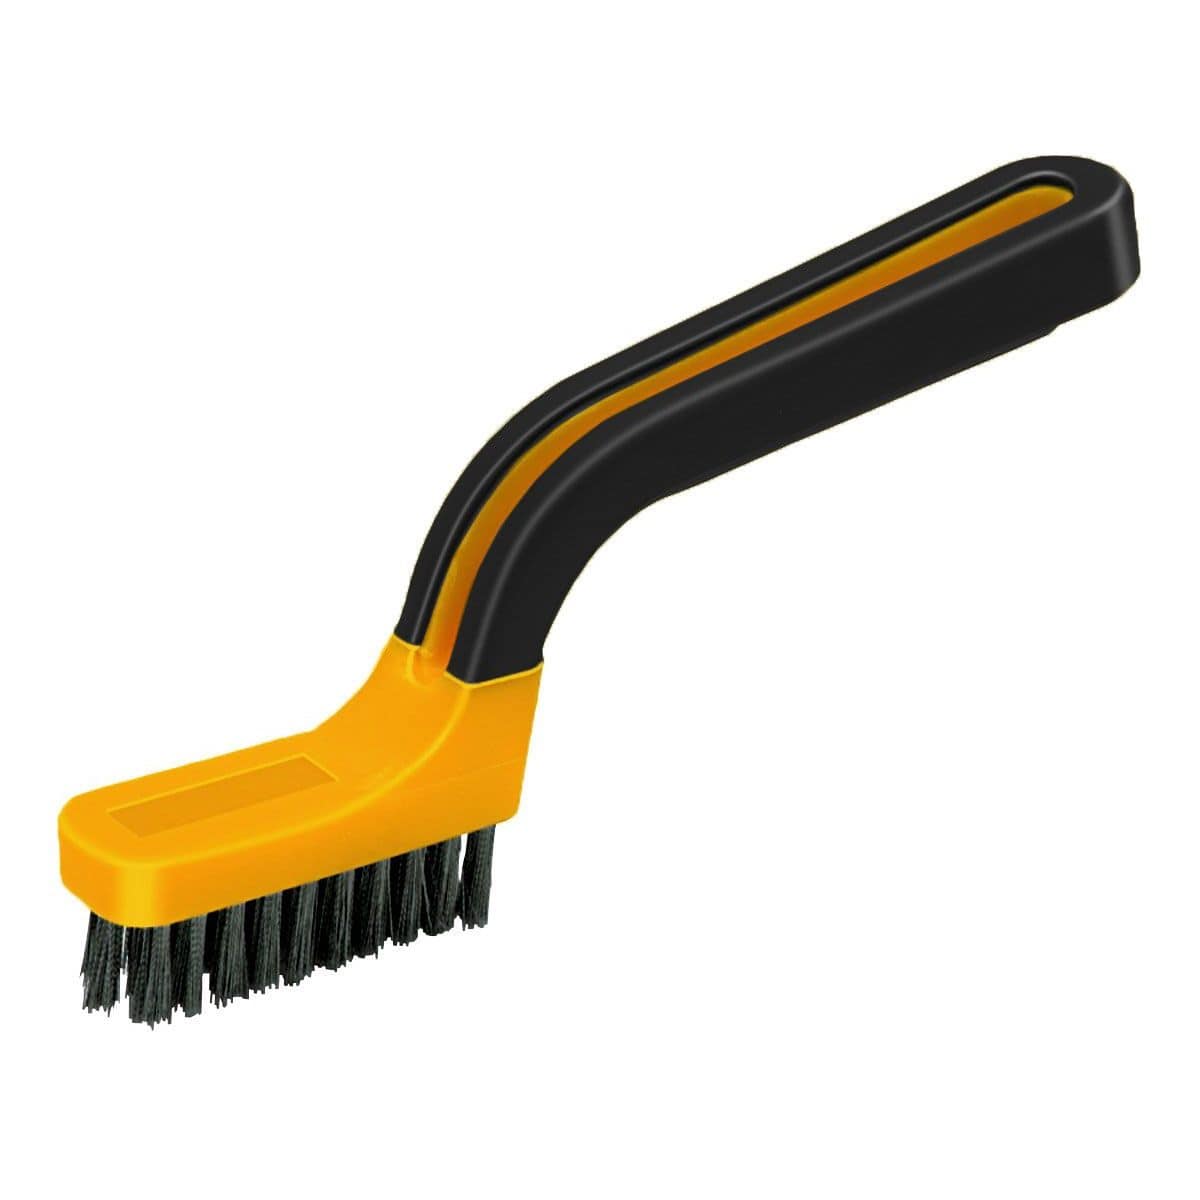 GB) Soft Grip Narrow Nylon Stripper/Grout Brush, Labelled » ALLWAY® The  Tools You Ask For By Name